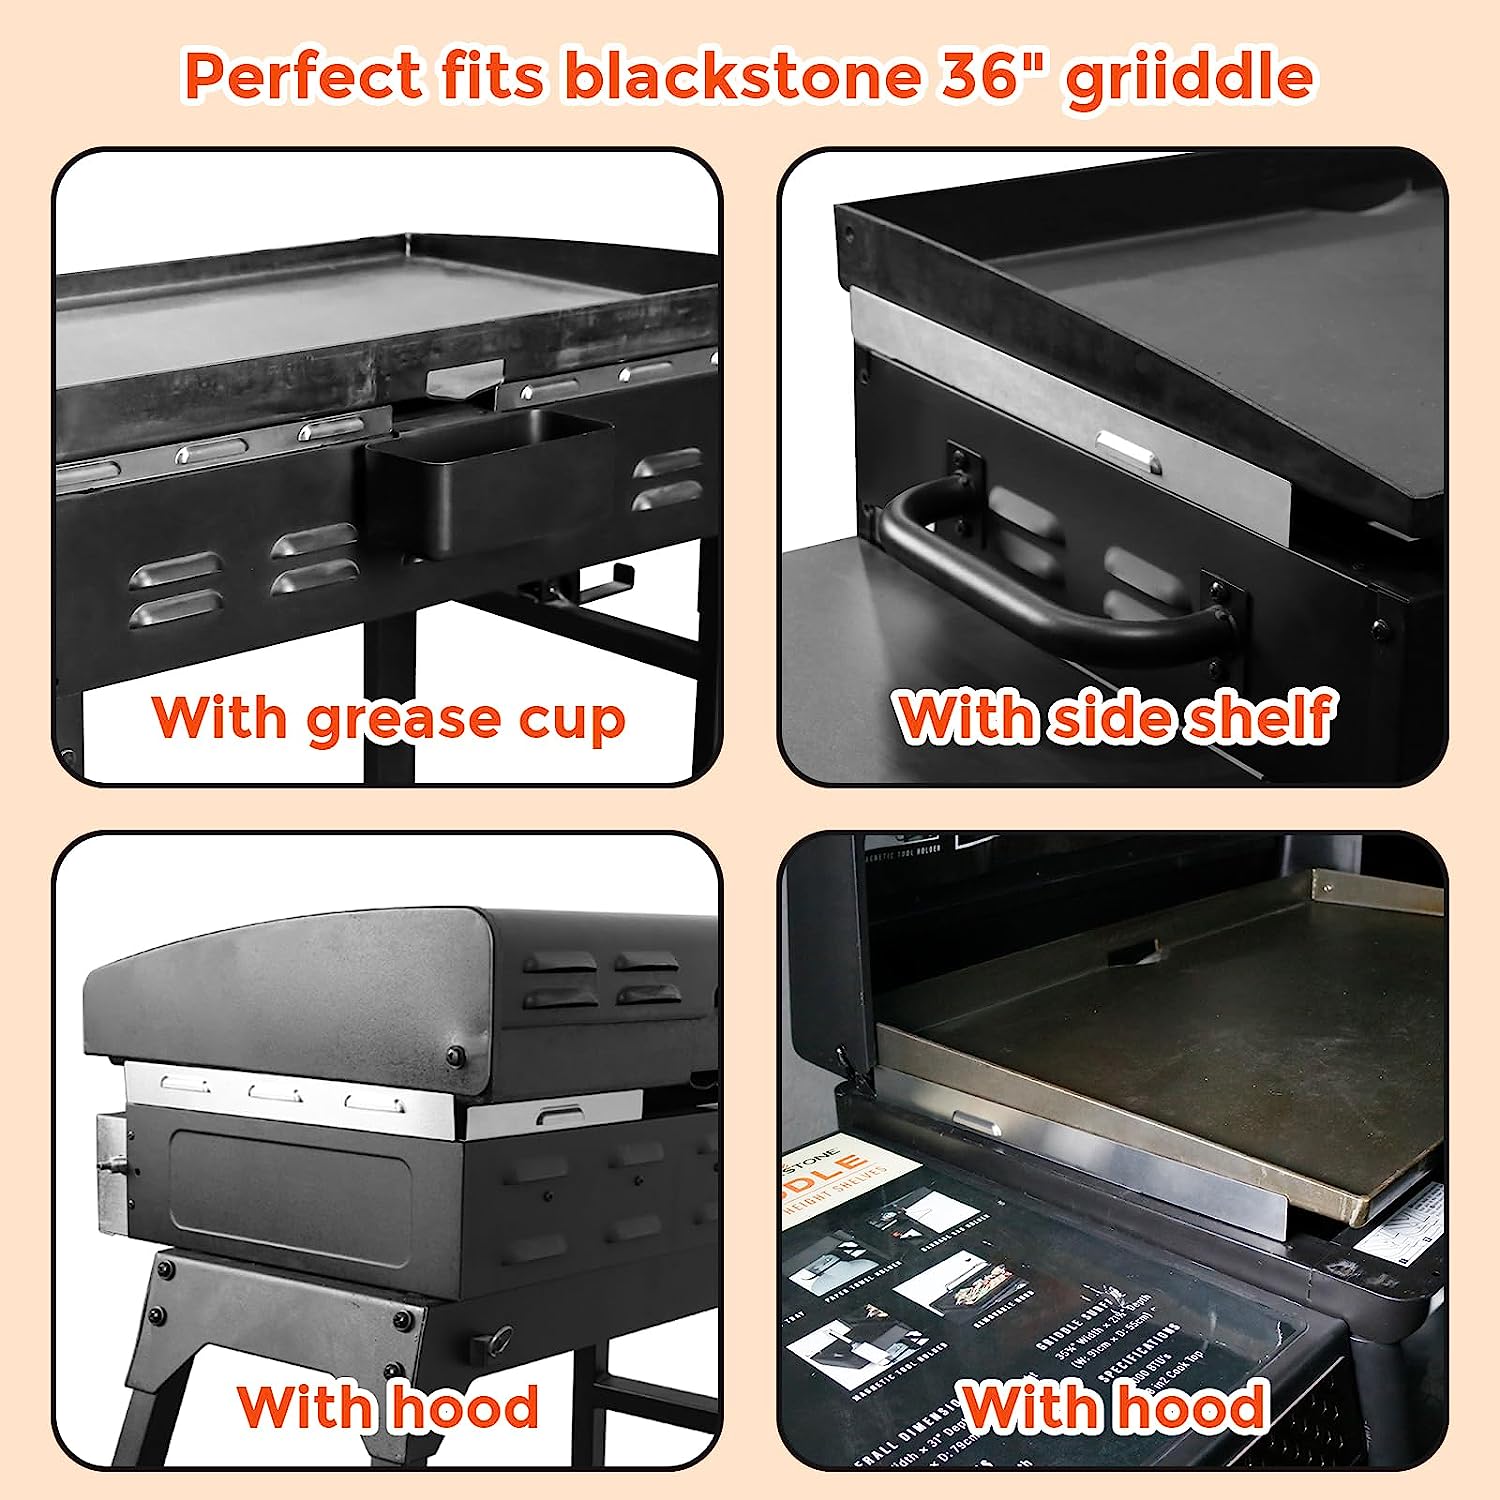 GrillPartsReplacement - Online BBQ Parts Retailer Wind Guards for Blackstone 22 inch Griddle Grills, Grill Accessories for Blackstone Flat Tops